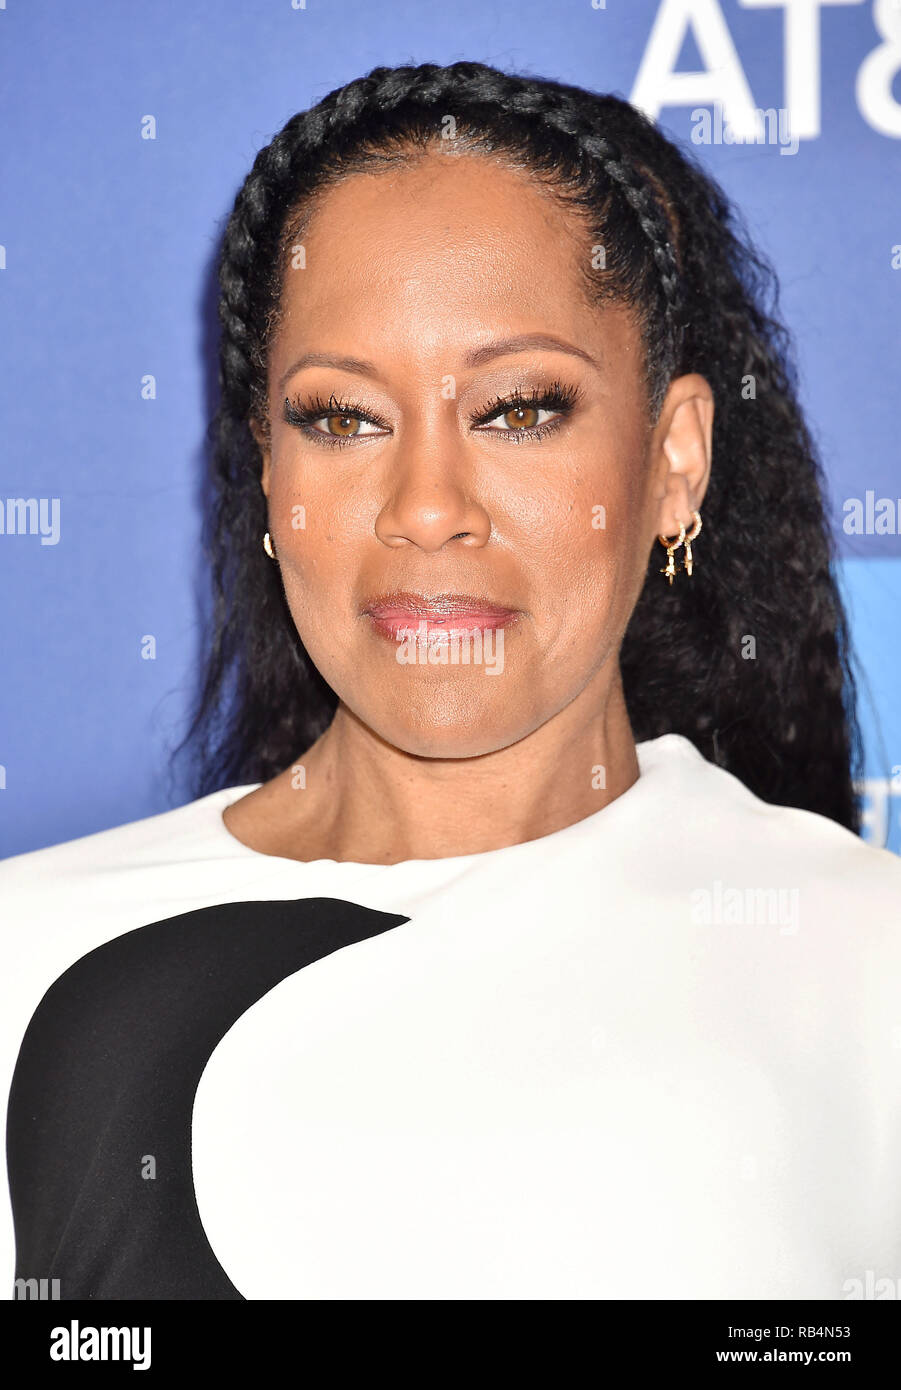 REGINA KING American film actress at the 30th Annual Palm Springs International Film Festival Film Awards Gala at Palm Springs Convention Center on January 3, 2019 in Palm Springs, California. Photo: Jeffrey Mayer Stock Photo